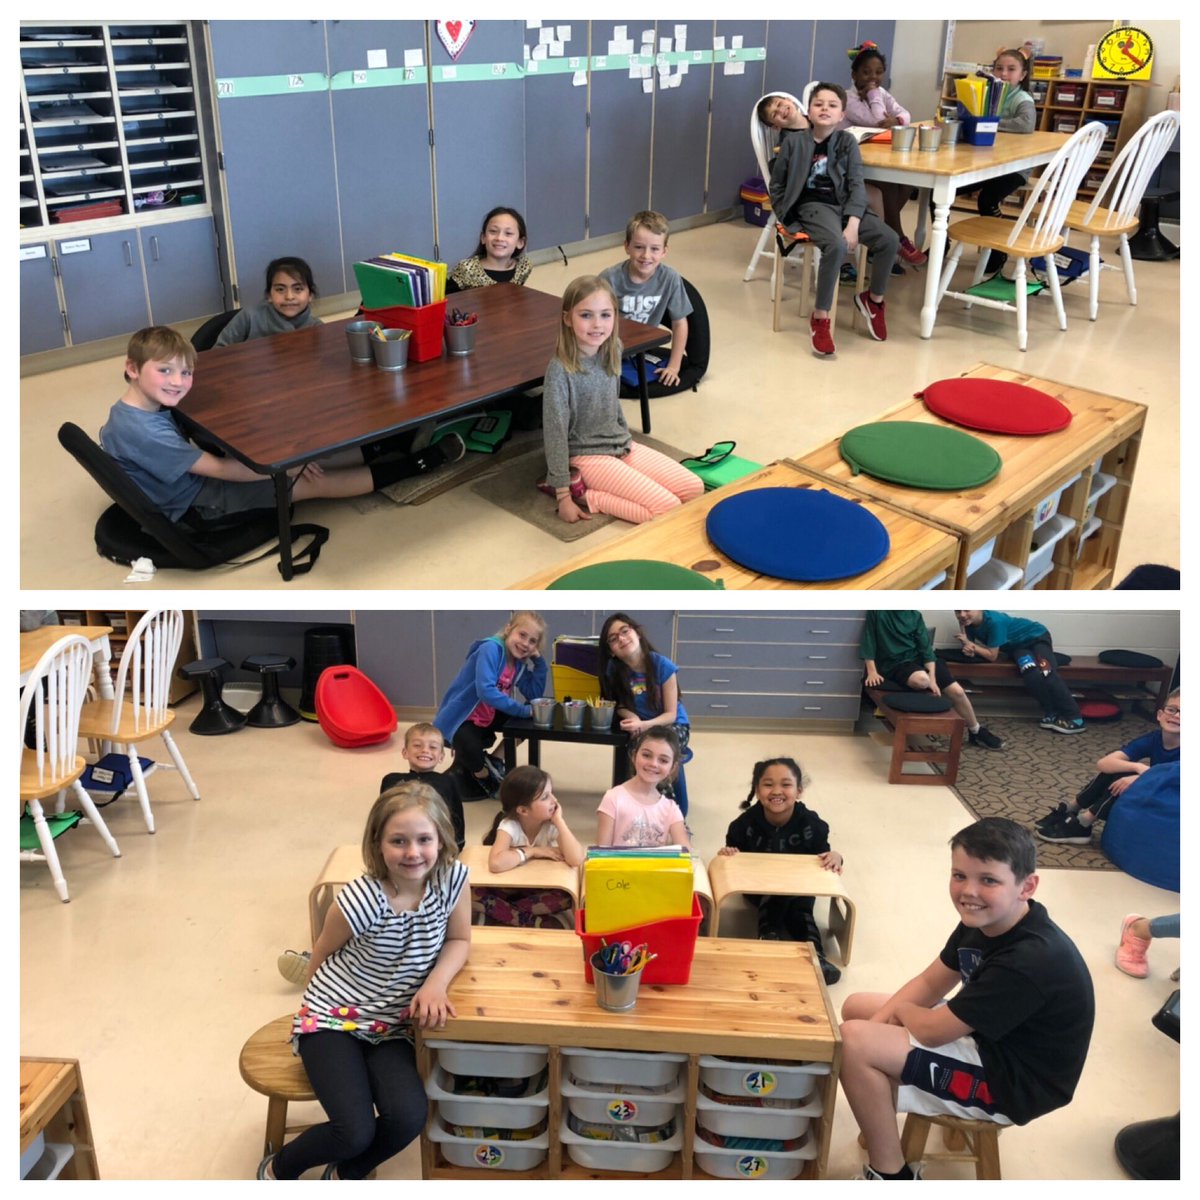 “Welcome to our newly designed classroom! This is what happens when we get more flexible seating furniture. We put our heads (and muscles) together and rearranged our room to make it how we wanted!” - The kiddos of room 409 #WEshinebright 🌟 #WEareLakota #studentvoiceandchoice